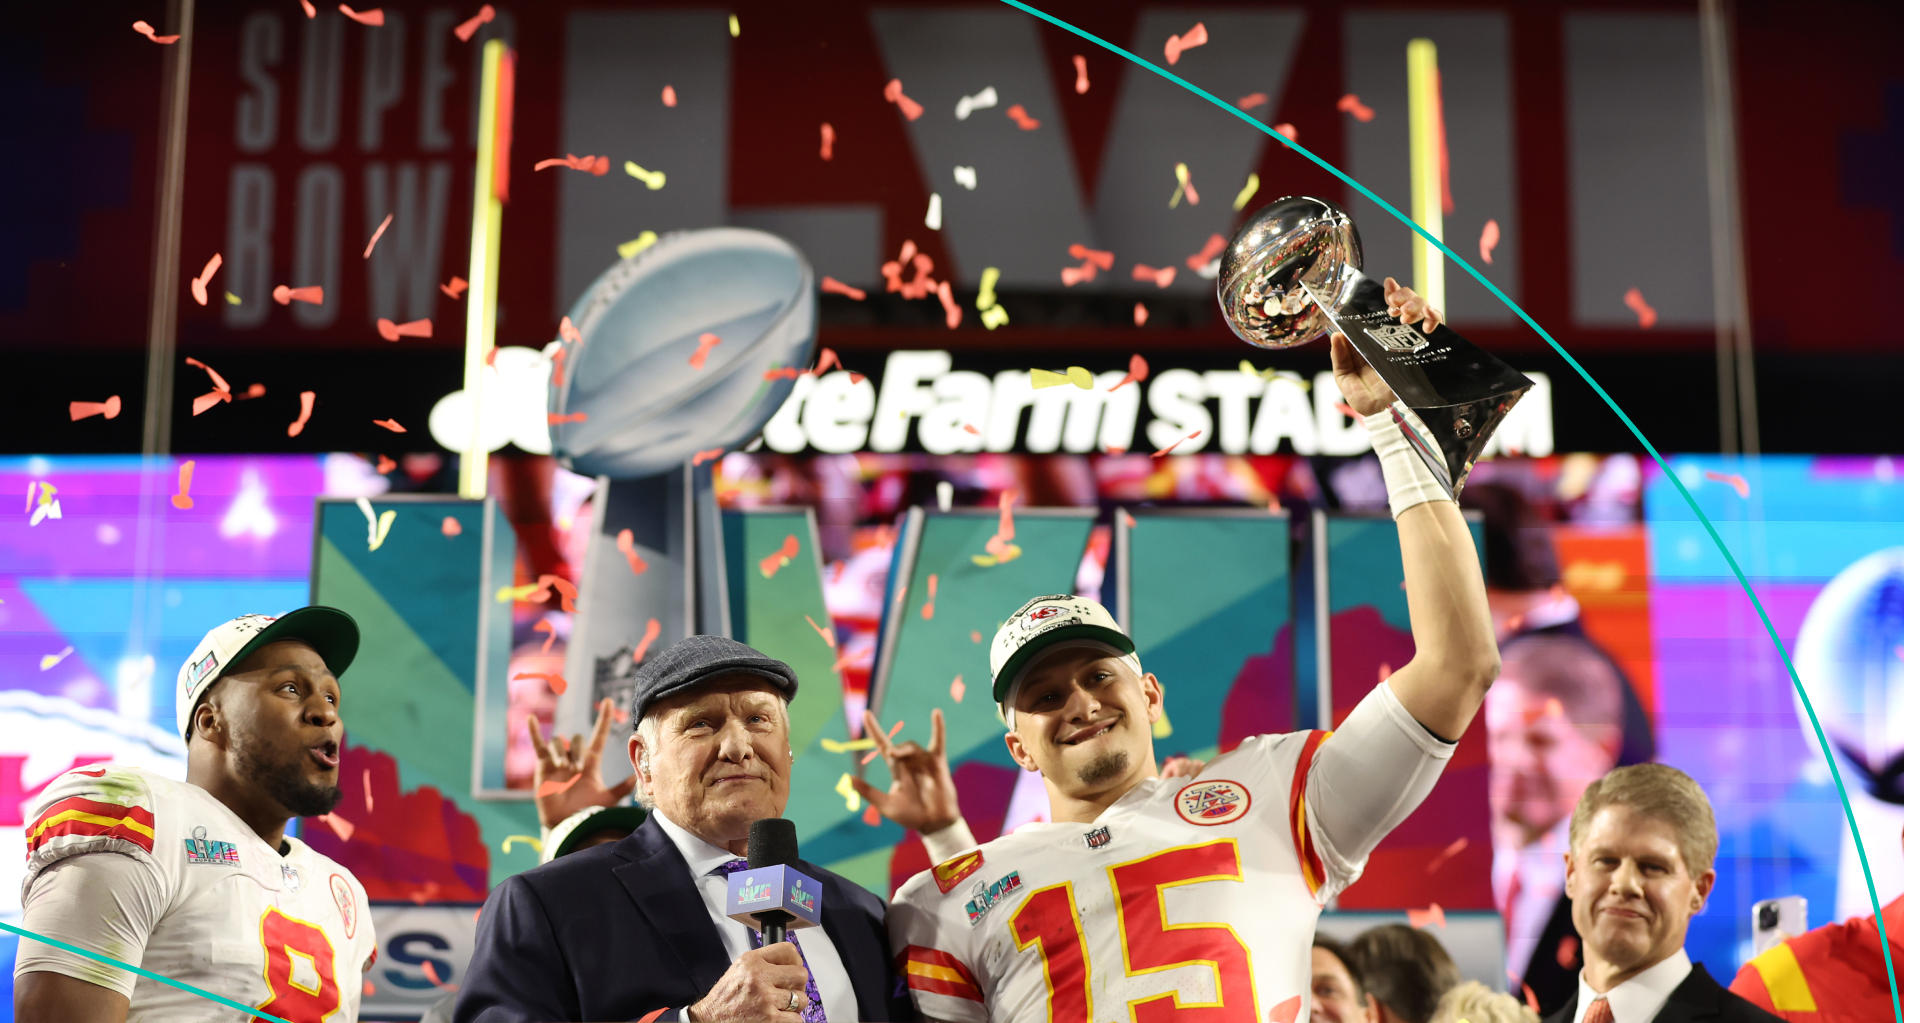 Patrick Mahomes of the Kansas City Chiefs celebrates with the the Vince Lombardi Trophy after defeating the Philadelphia Eagles 38-35 in Super Bowl LVII at State Farm Stadium on February 12, 2023 